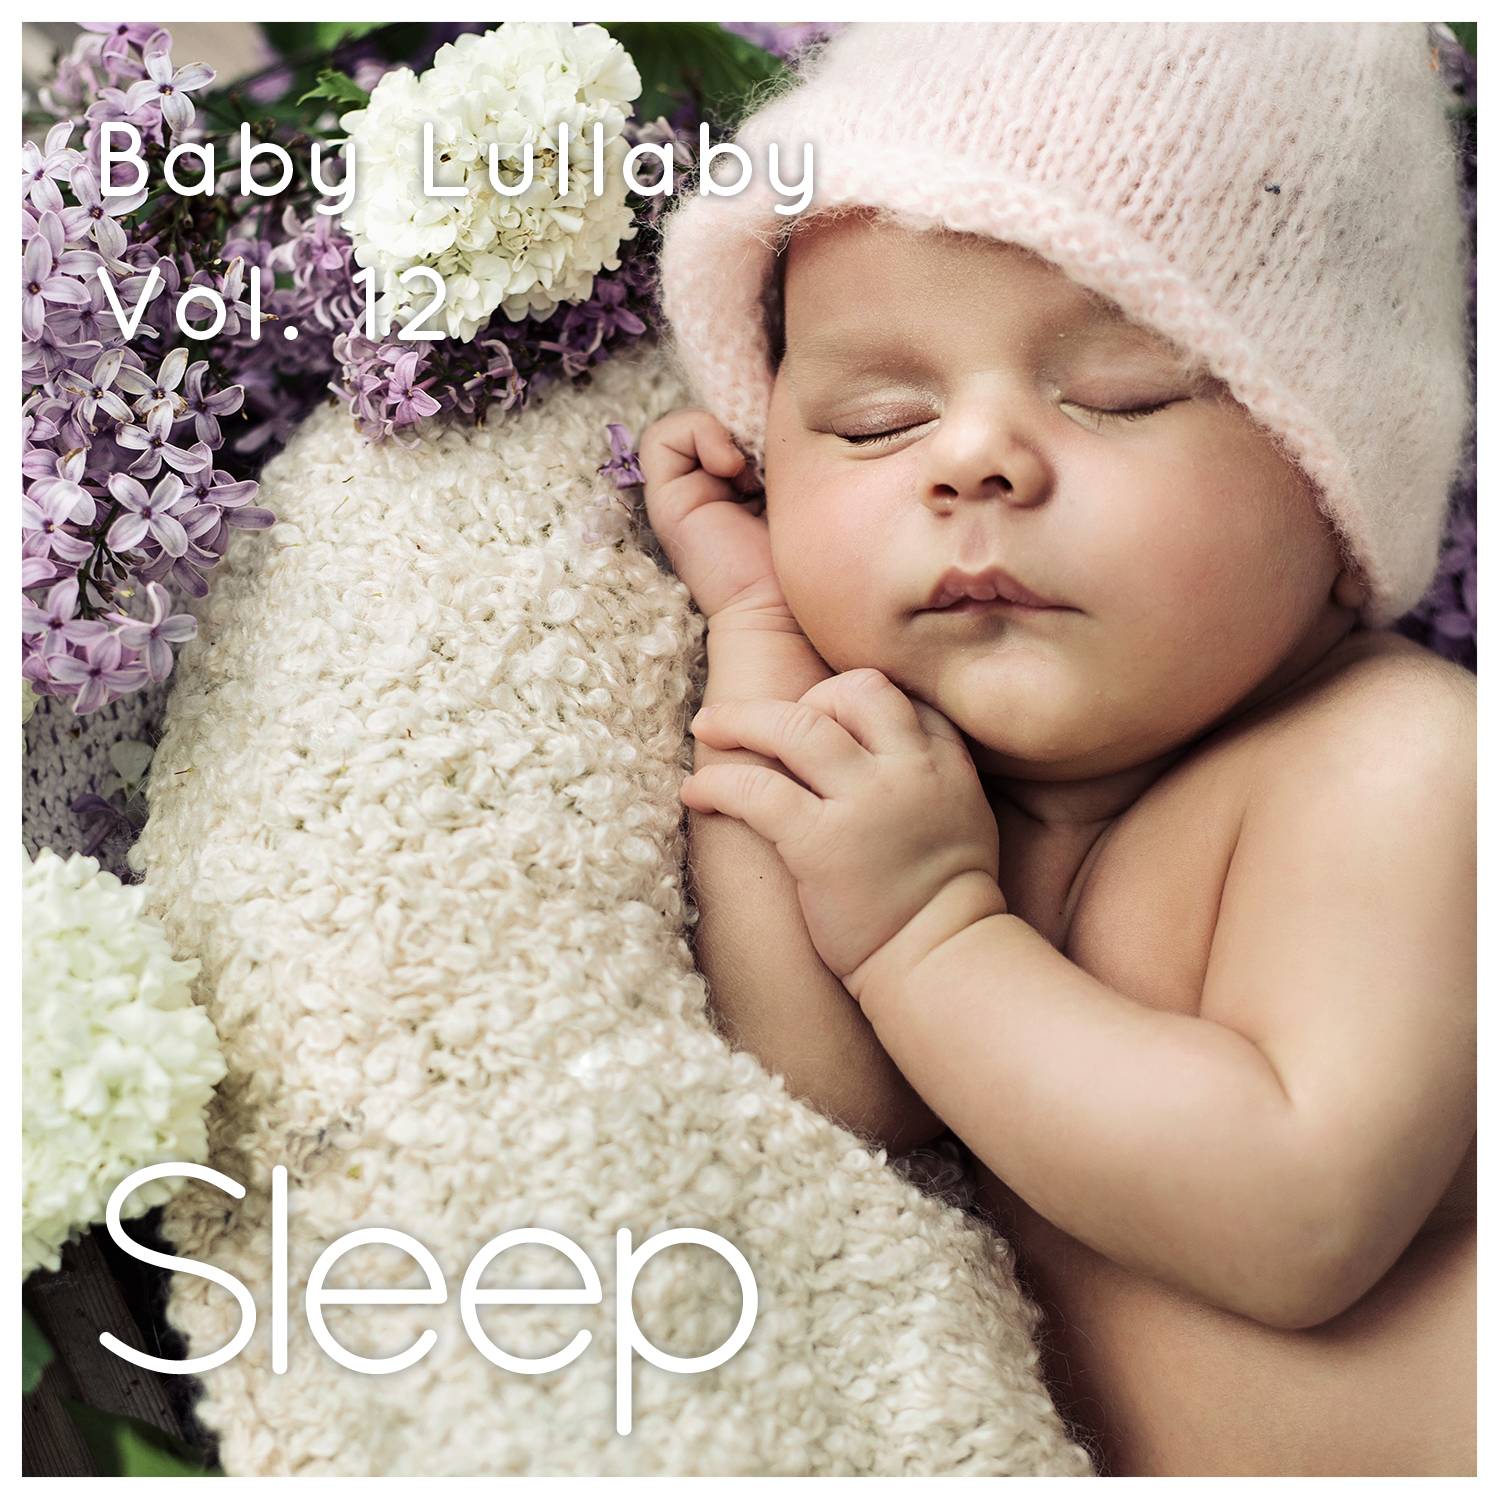 Baby Sleep Ambient Lullaby, Pt. 58